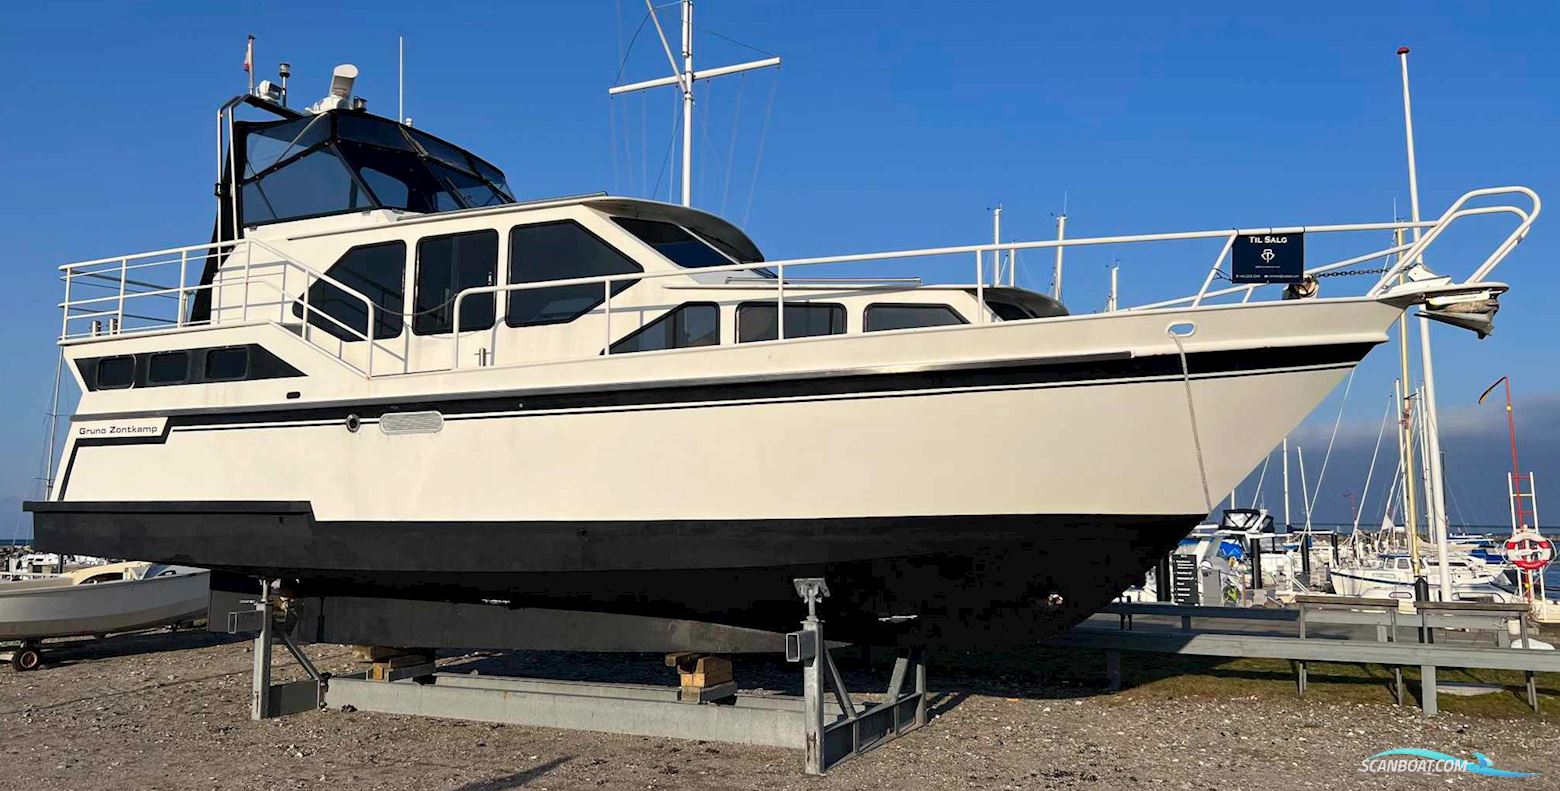 Gruno 35 Sport Motor boat 1996, with Iveco Aifo 120hk engine, Denmark